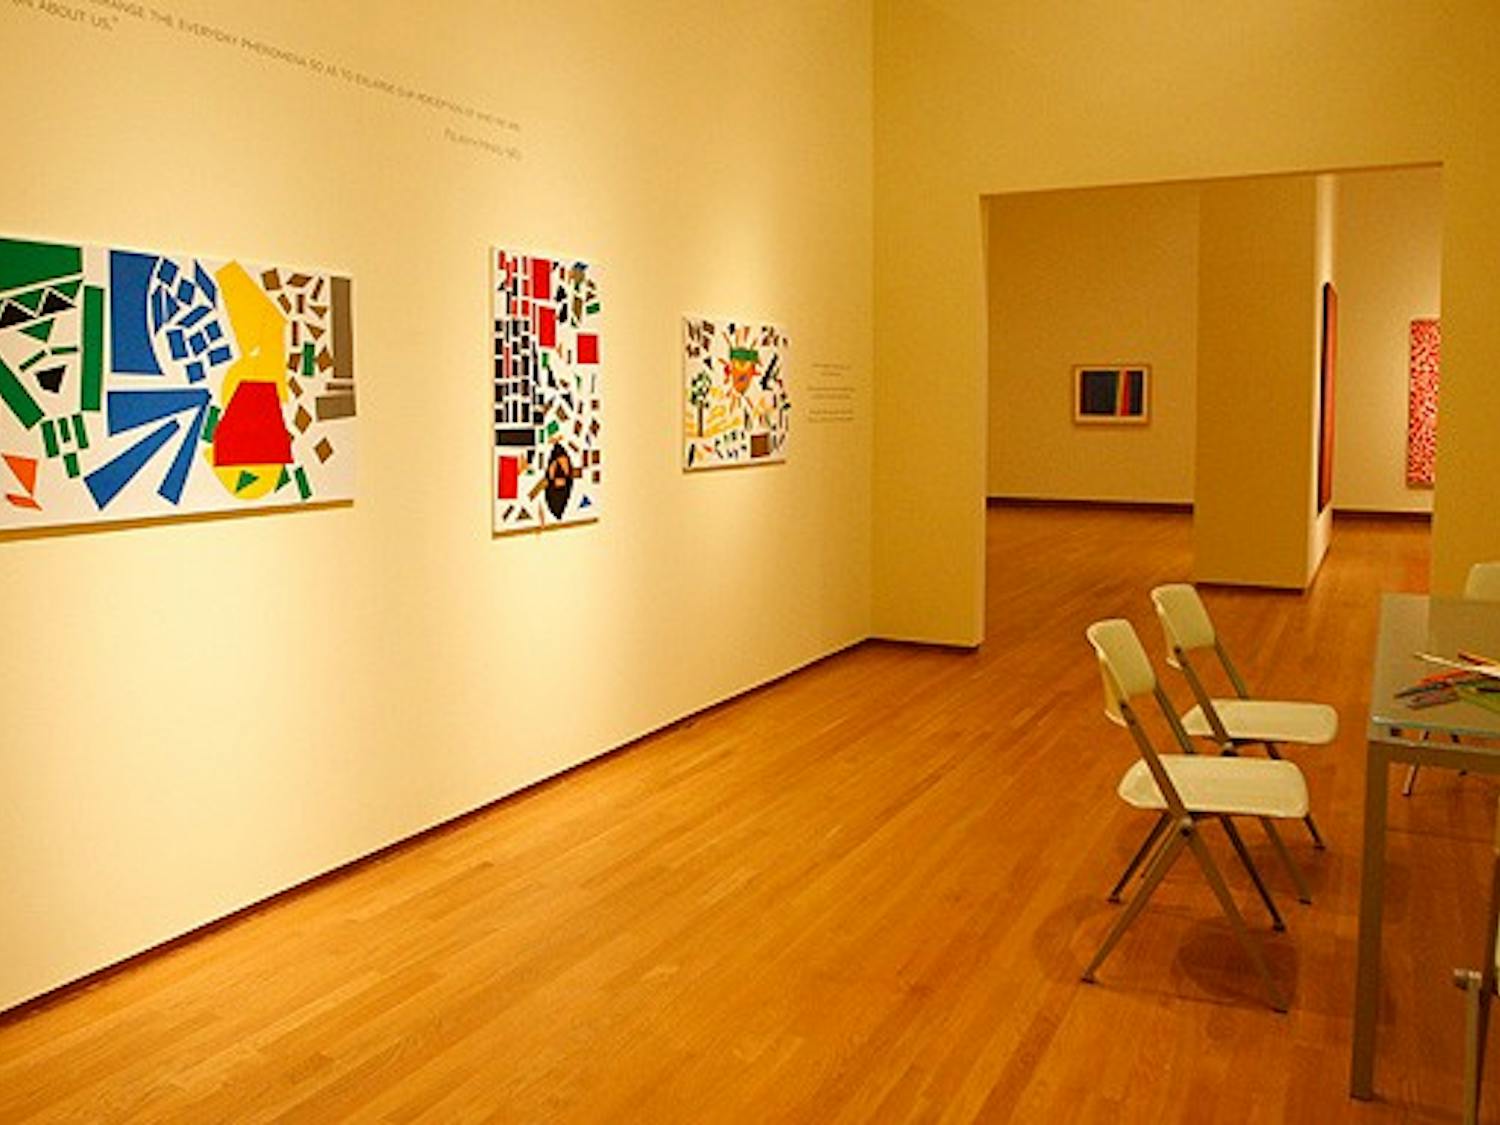 Both Felrath Hines and Alma Thomas were black artists who worked in an abstract style. Hines started painting full-time after retirement, and Thomas’ first show came at age 68.